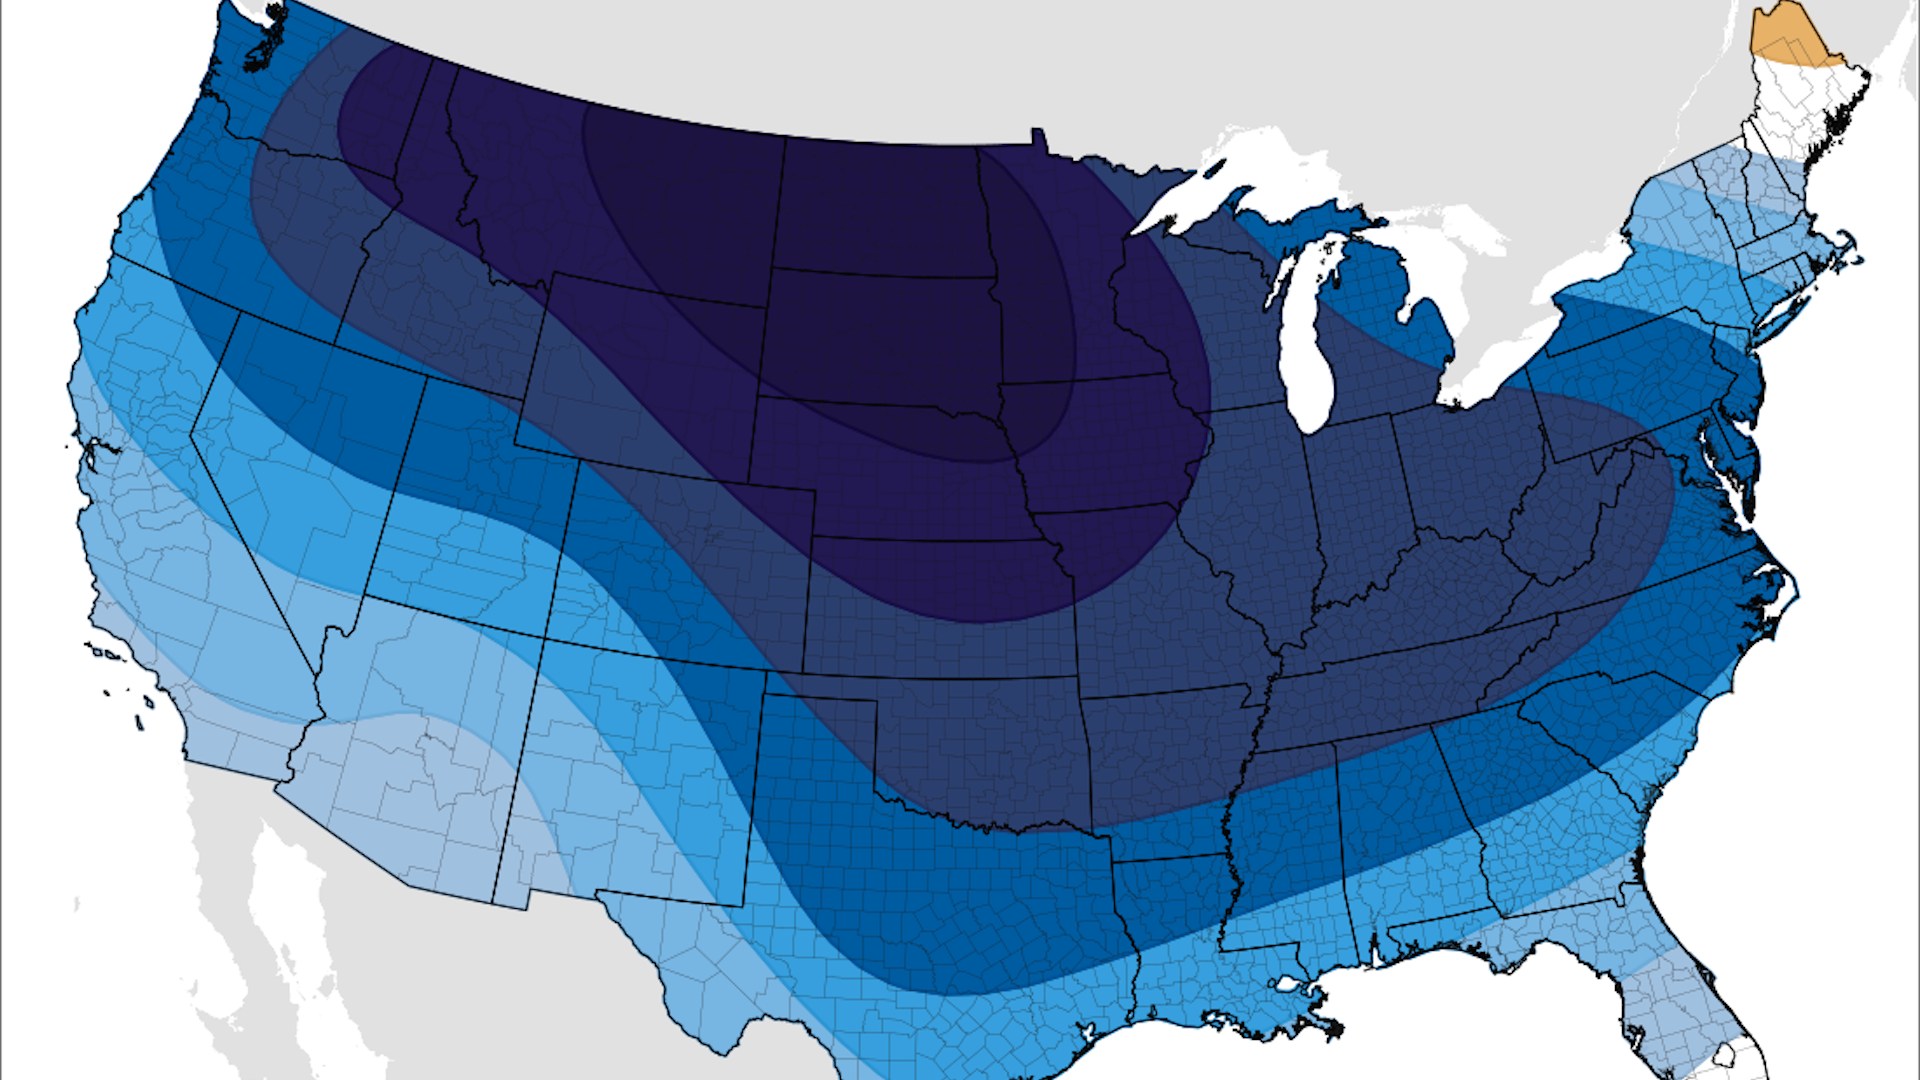 Forecast map of temperature departures from average during the next 6 to 10 days in December.